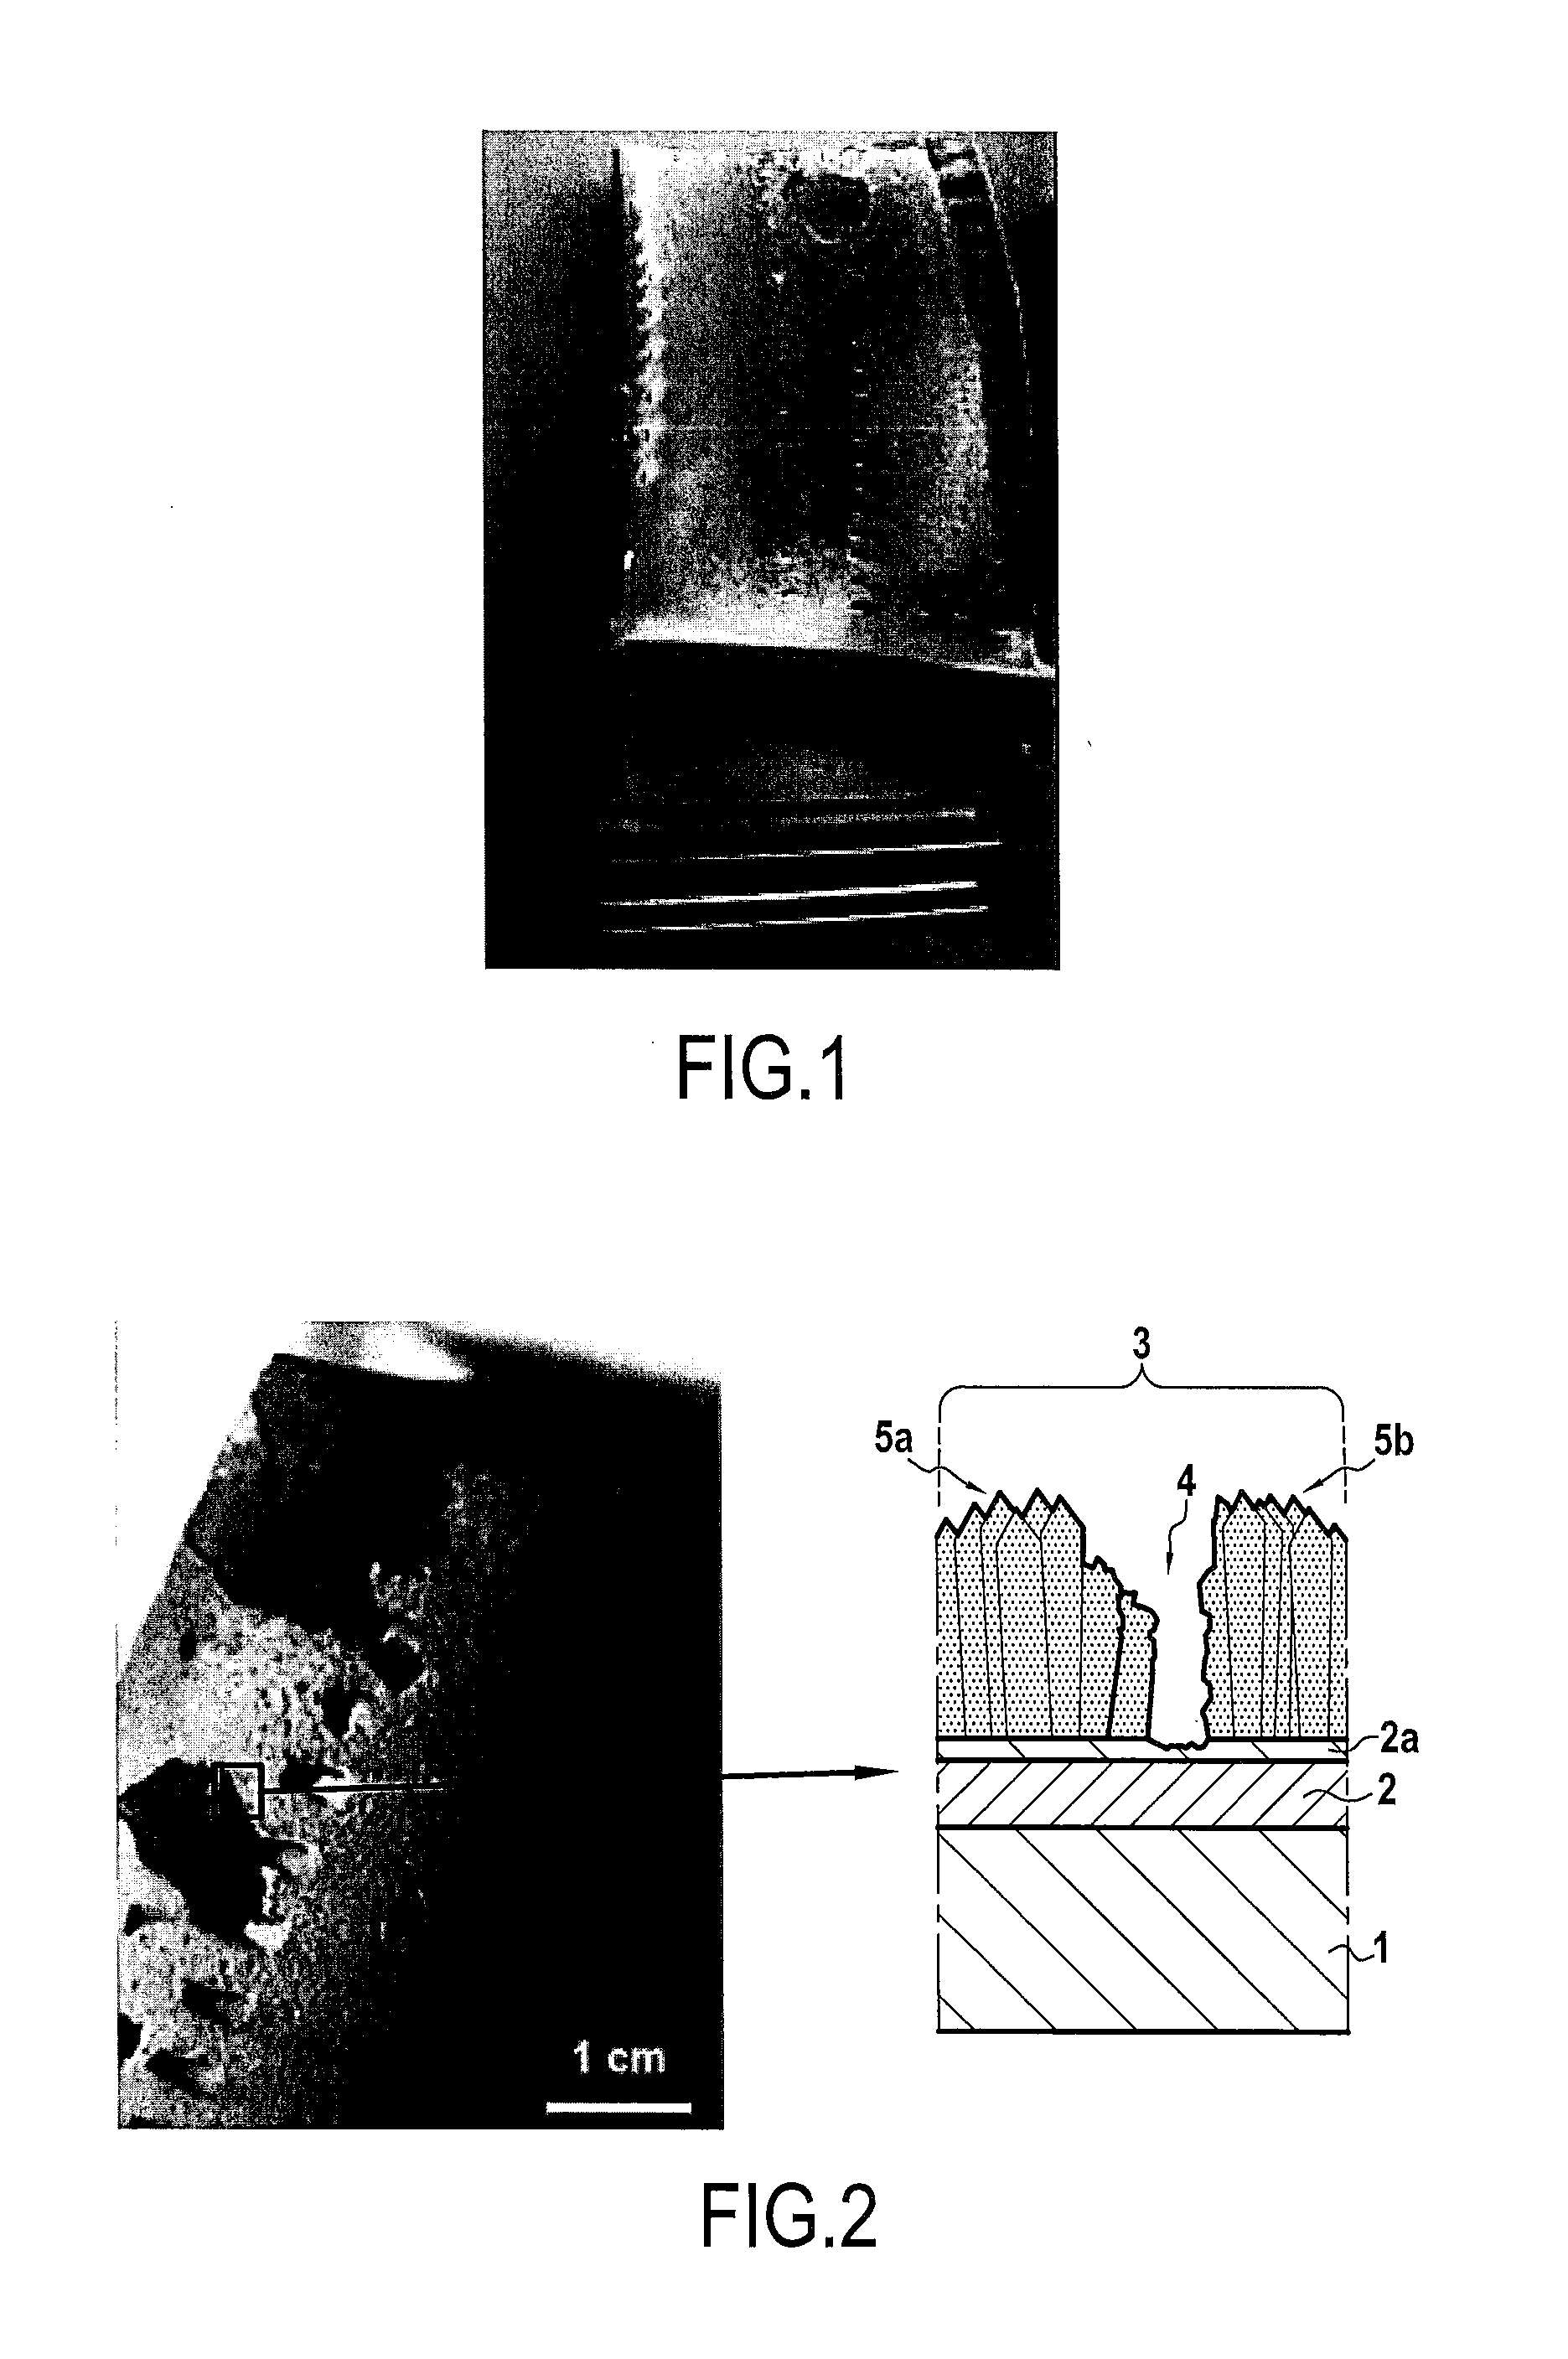 Method for localised repair of a damaged thermal barrier